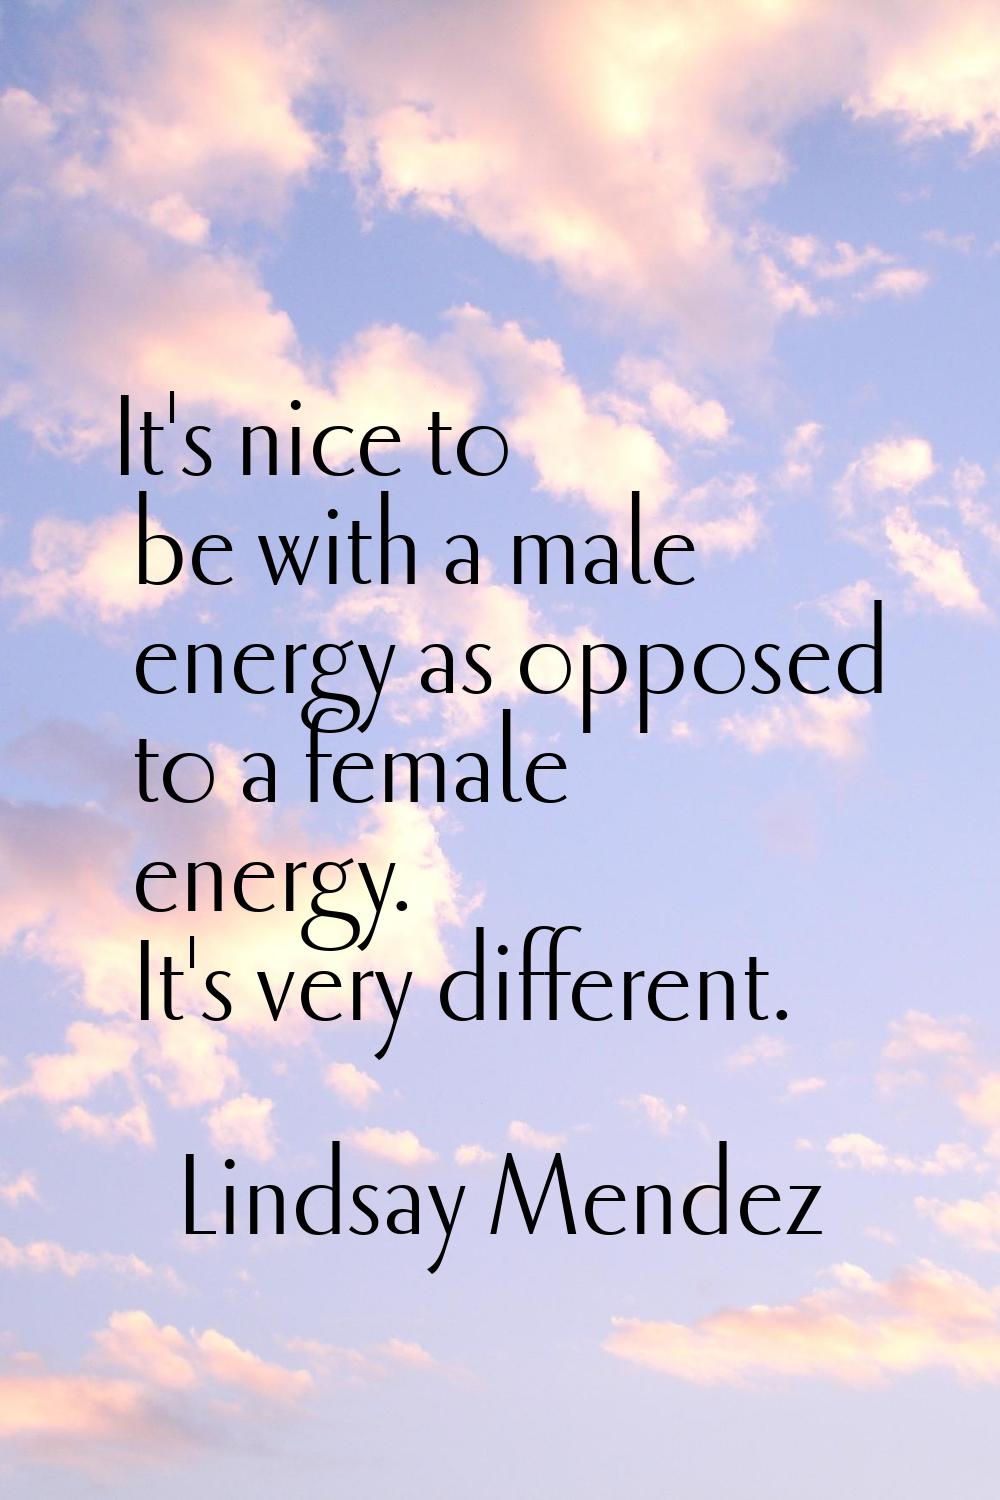 It's nice to be with a male energy as opposed to a female energy. It's very different.